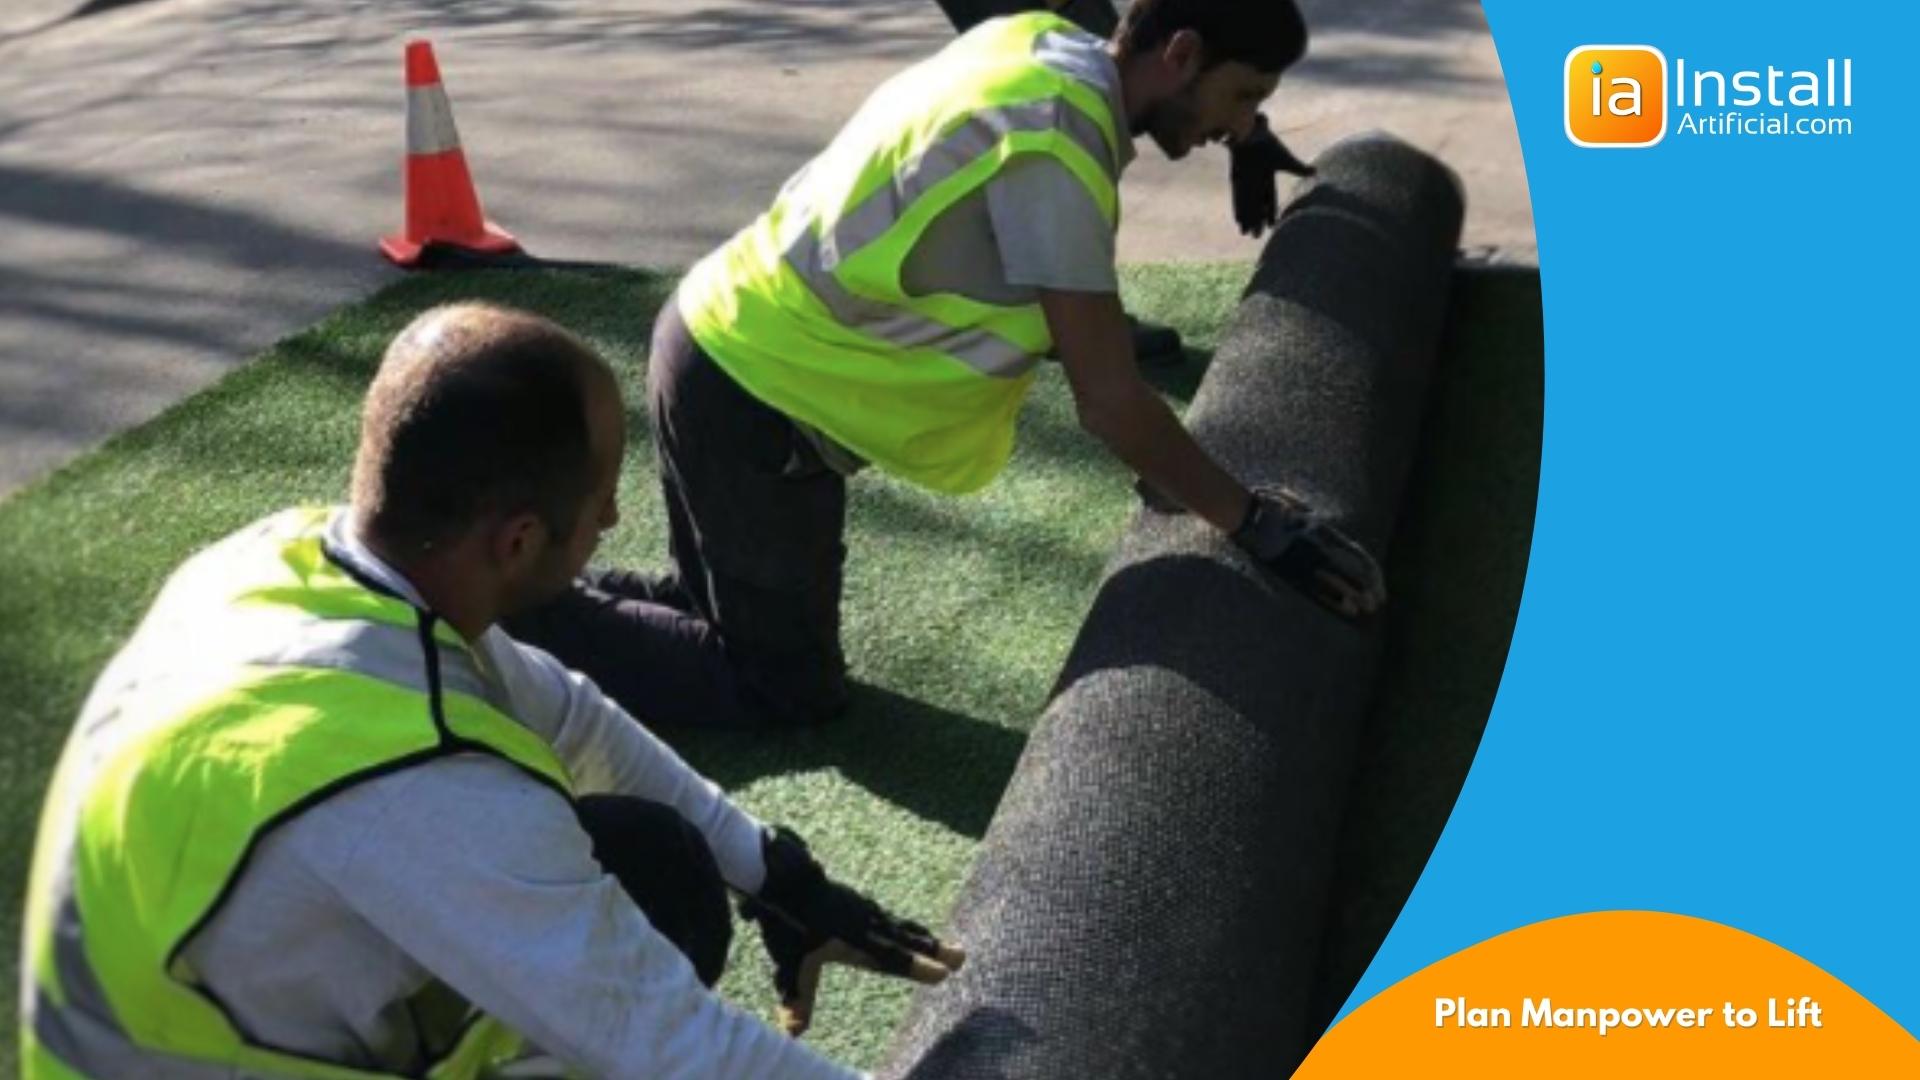 plan manpower to lift artificial grass from curbside after delivery